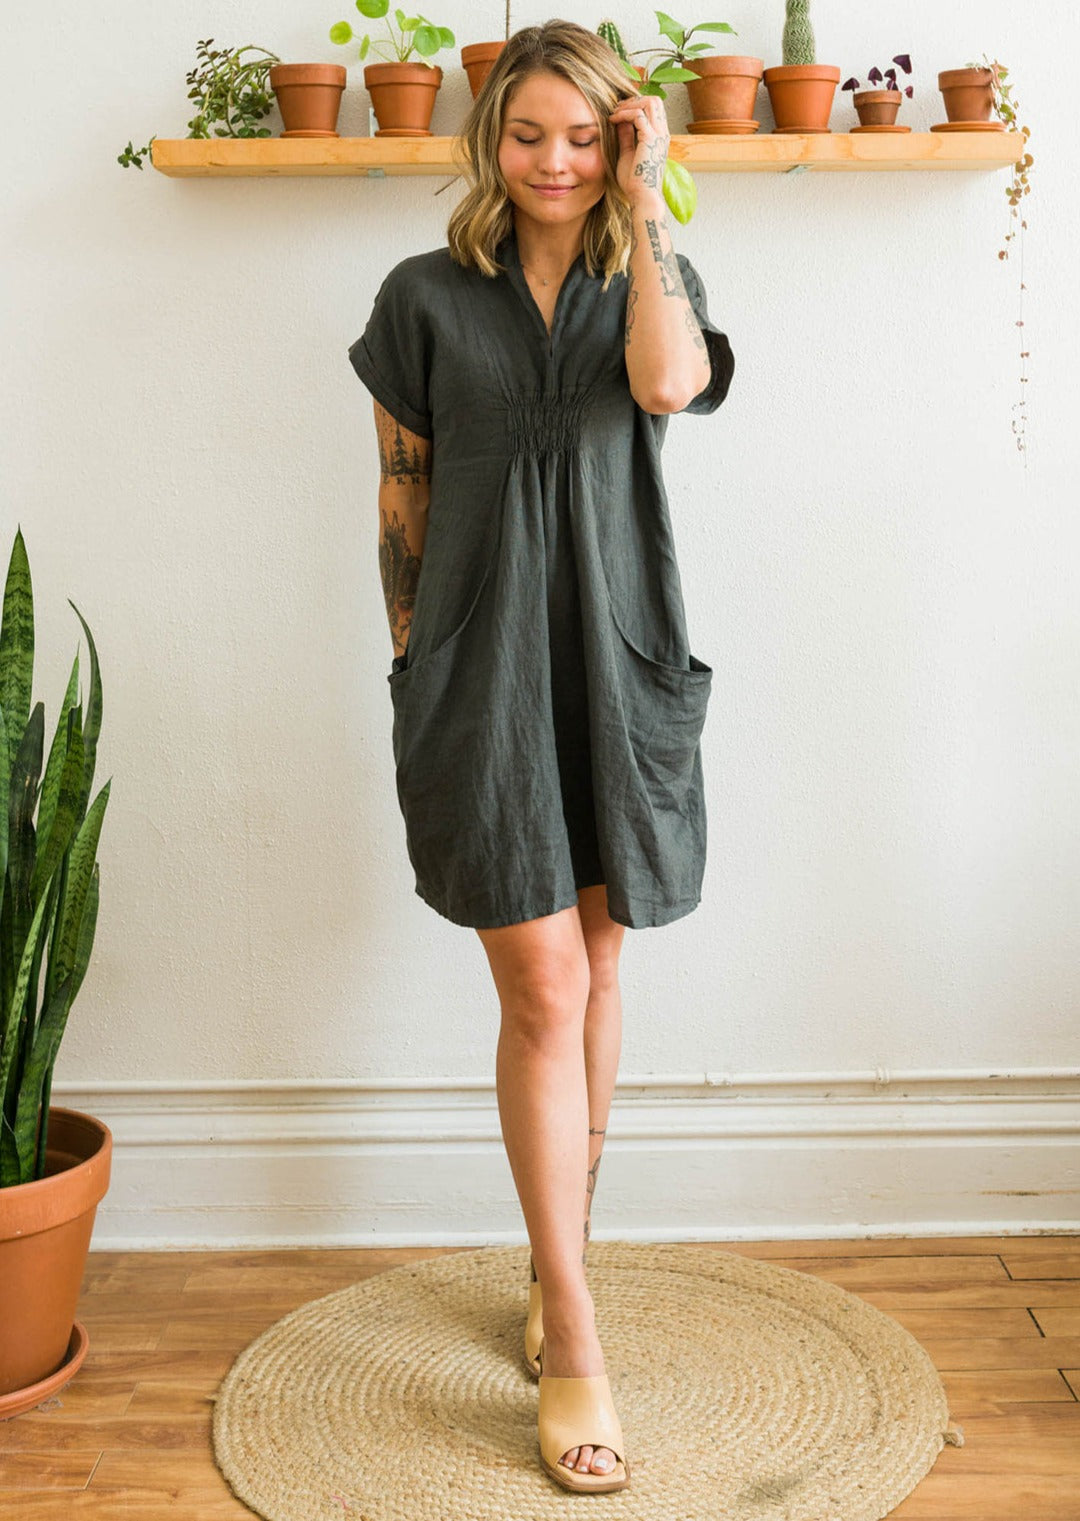 Charcoal linen Summer dress with side pockets